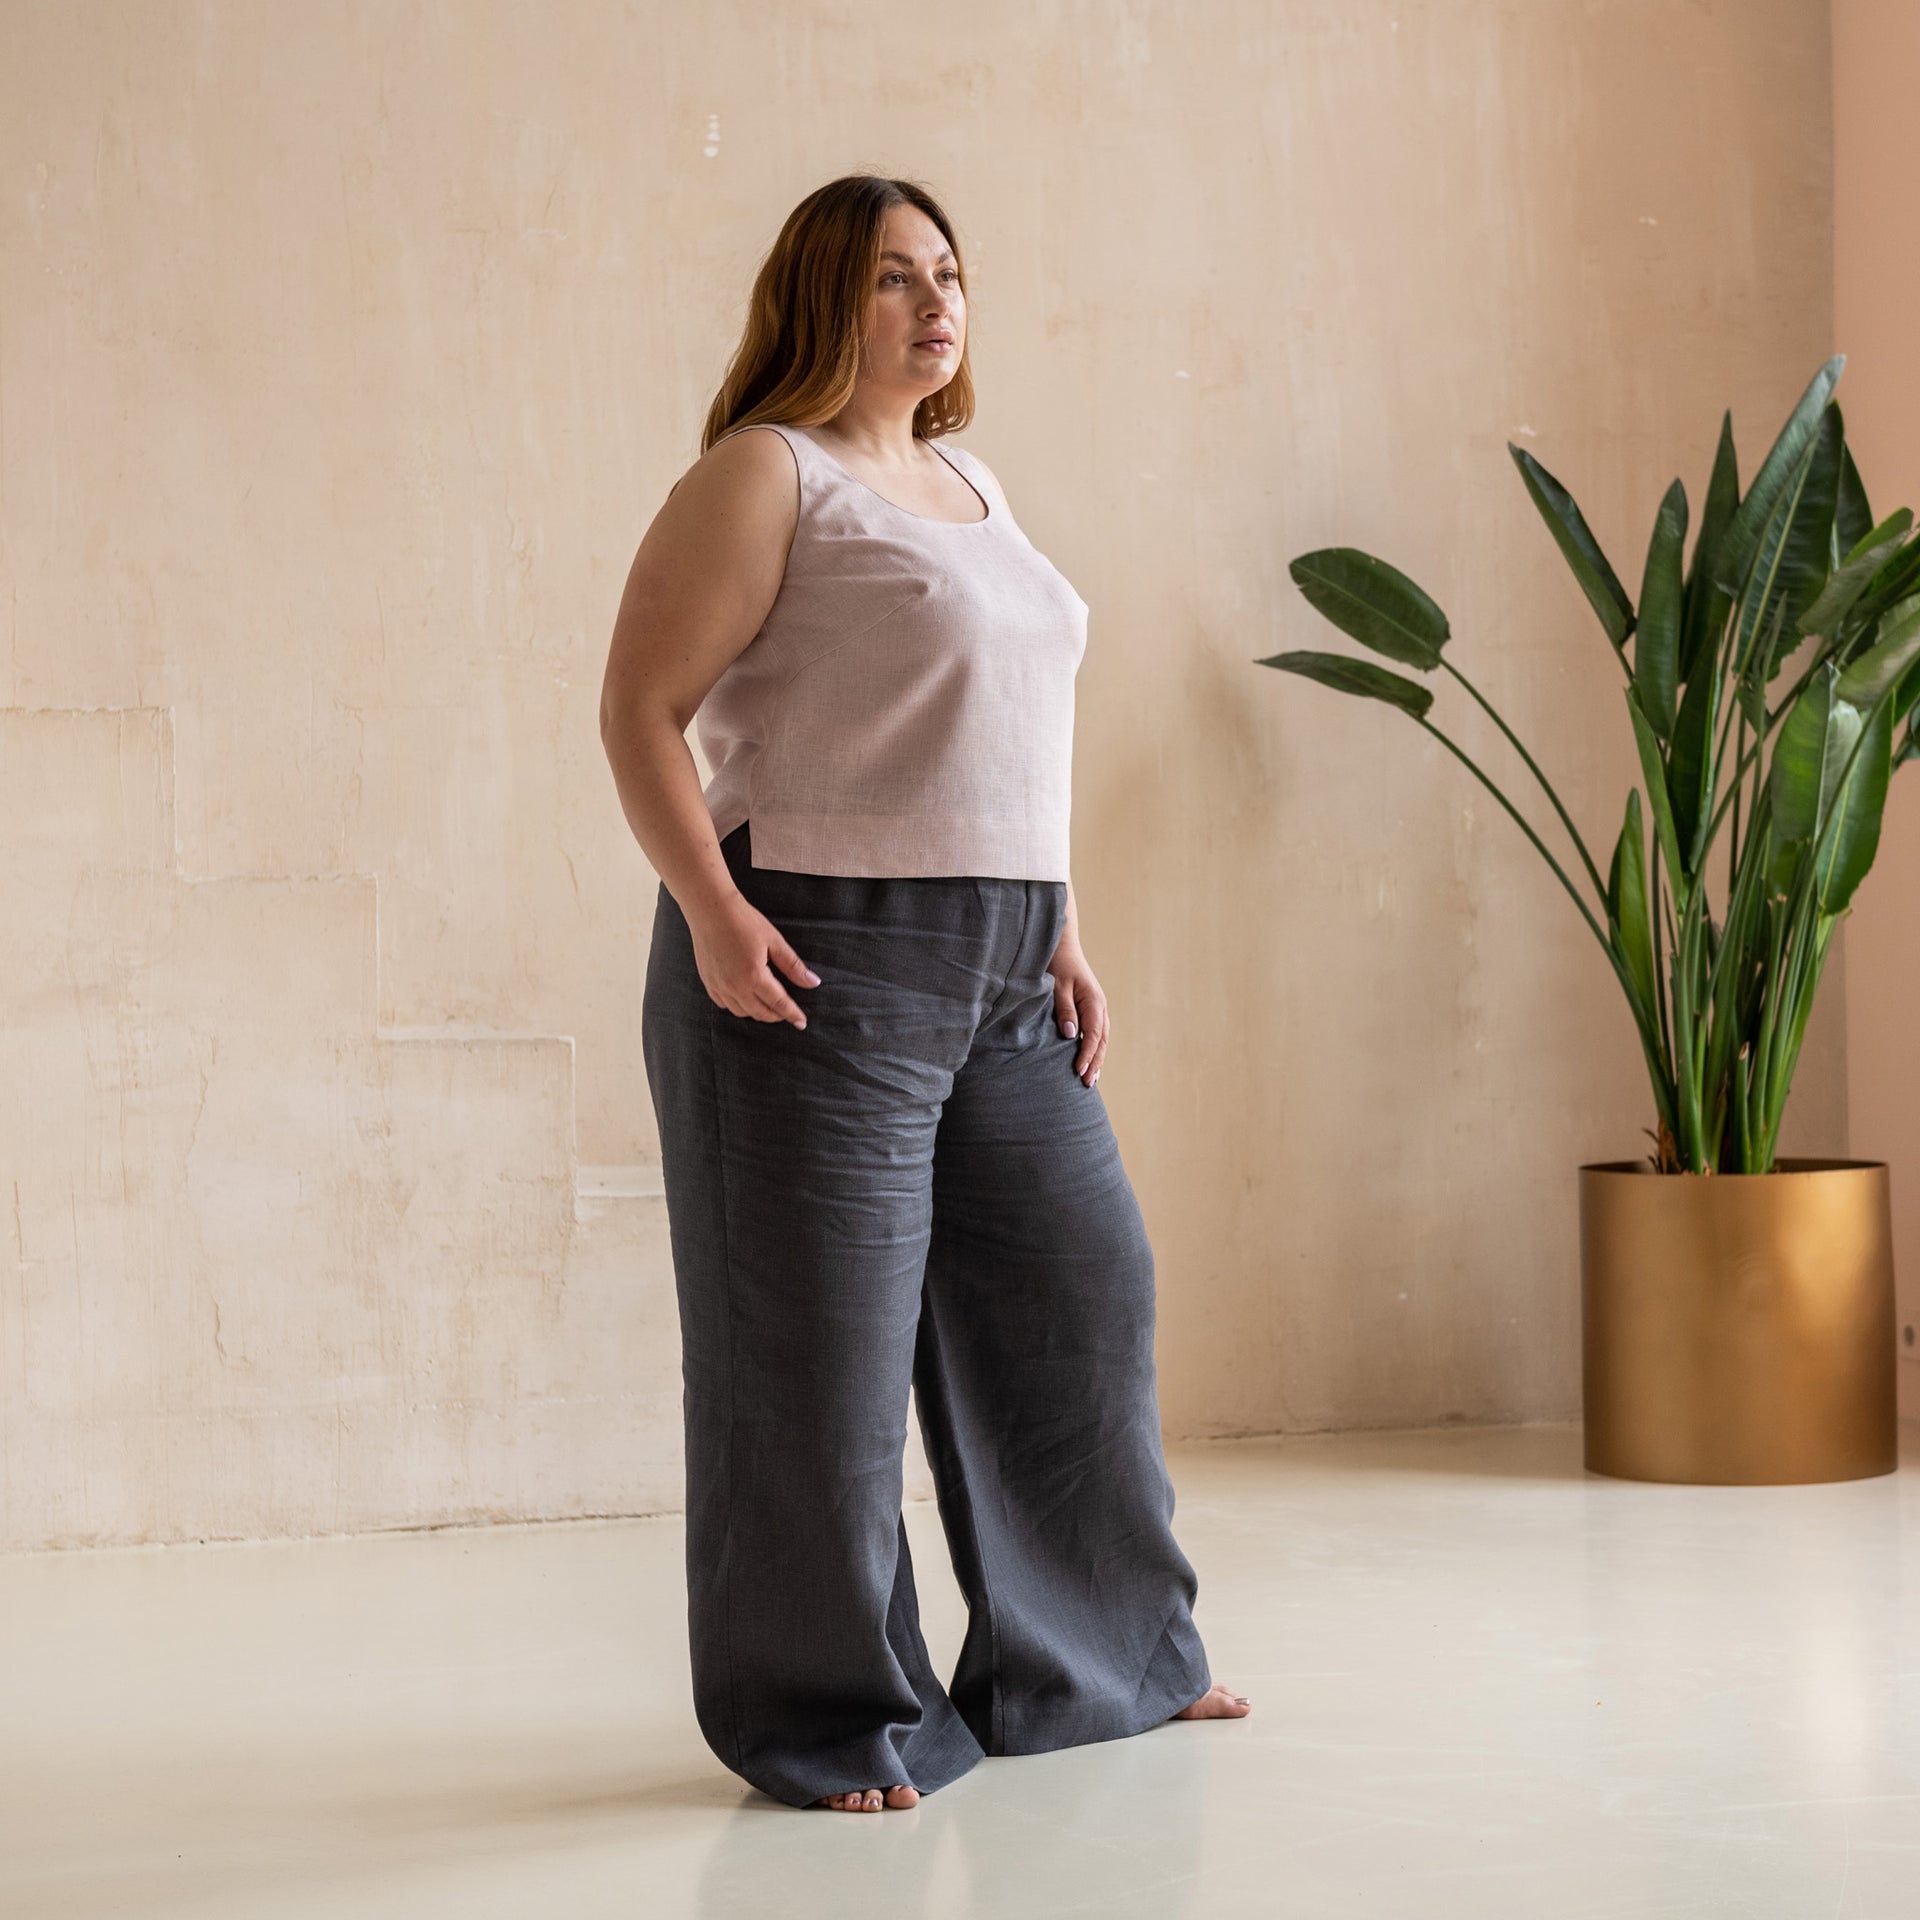 Wide-leg Linen Pants with an Elastic Waistband - Comfy and Breathable